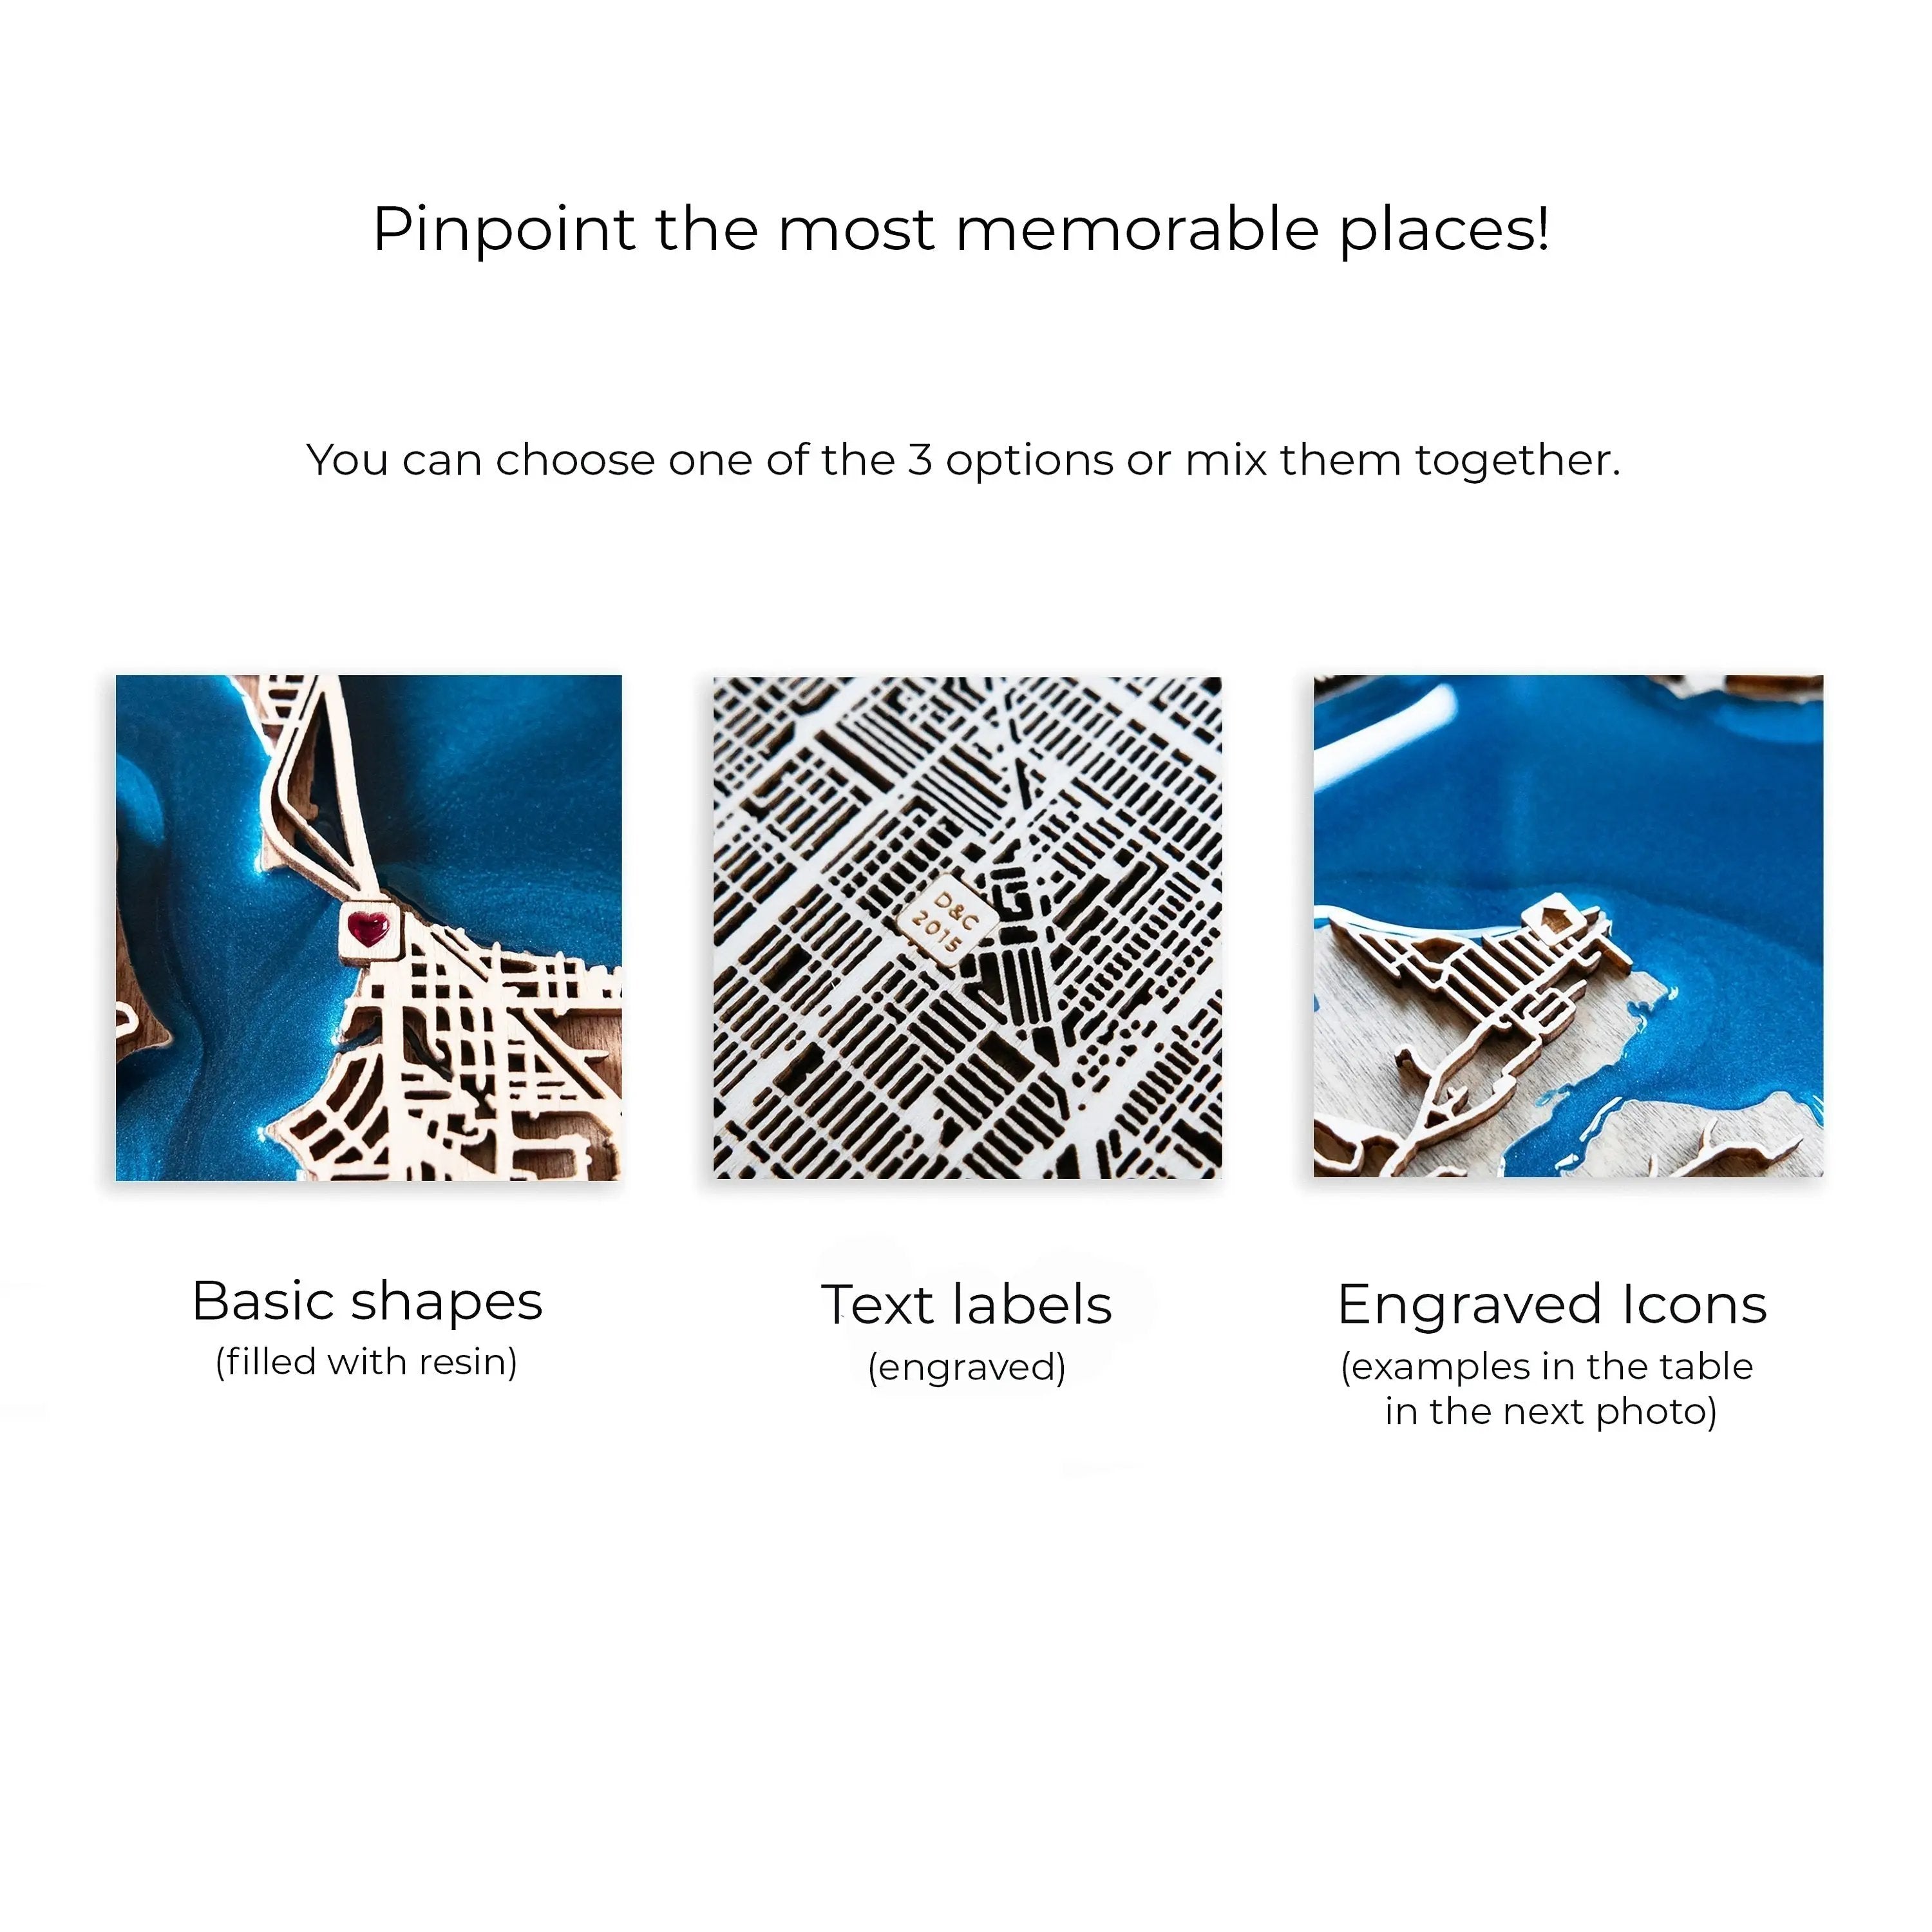 Pinpoint the most memorable places! You can choose basic shapes filed eith resin, engraved short text or simple icons.